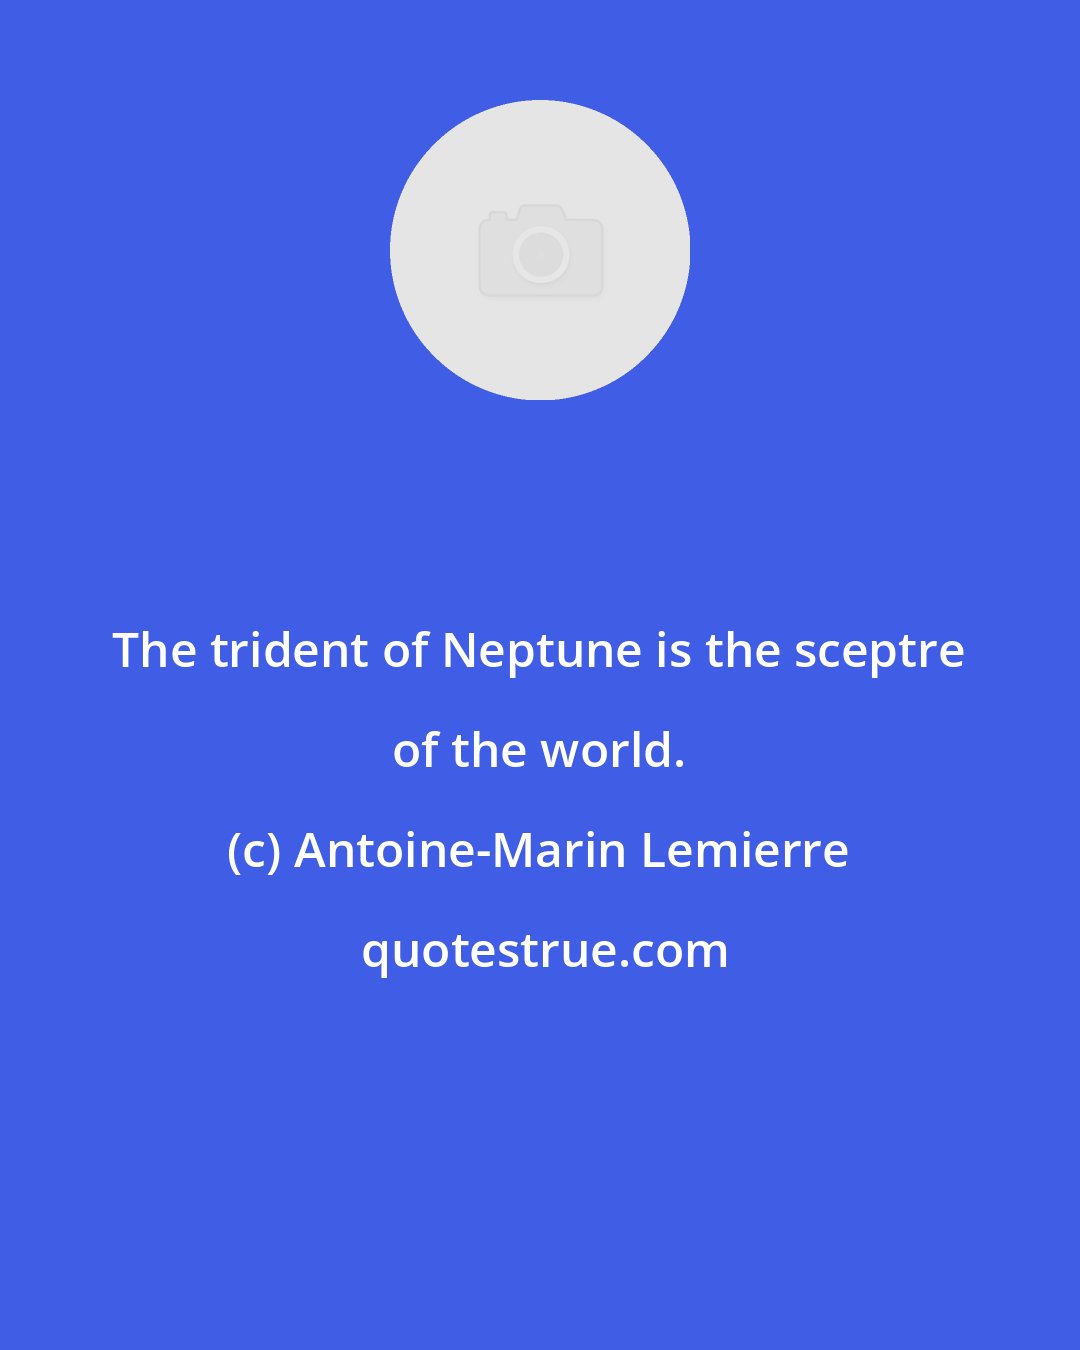 Antoine-Marin Lemierre: The trident of Neptune is the sceptre of the world.